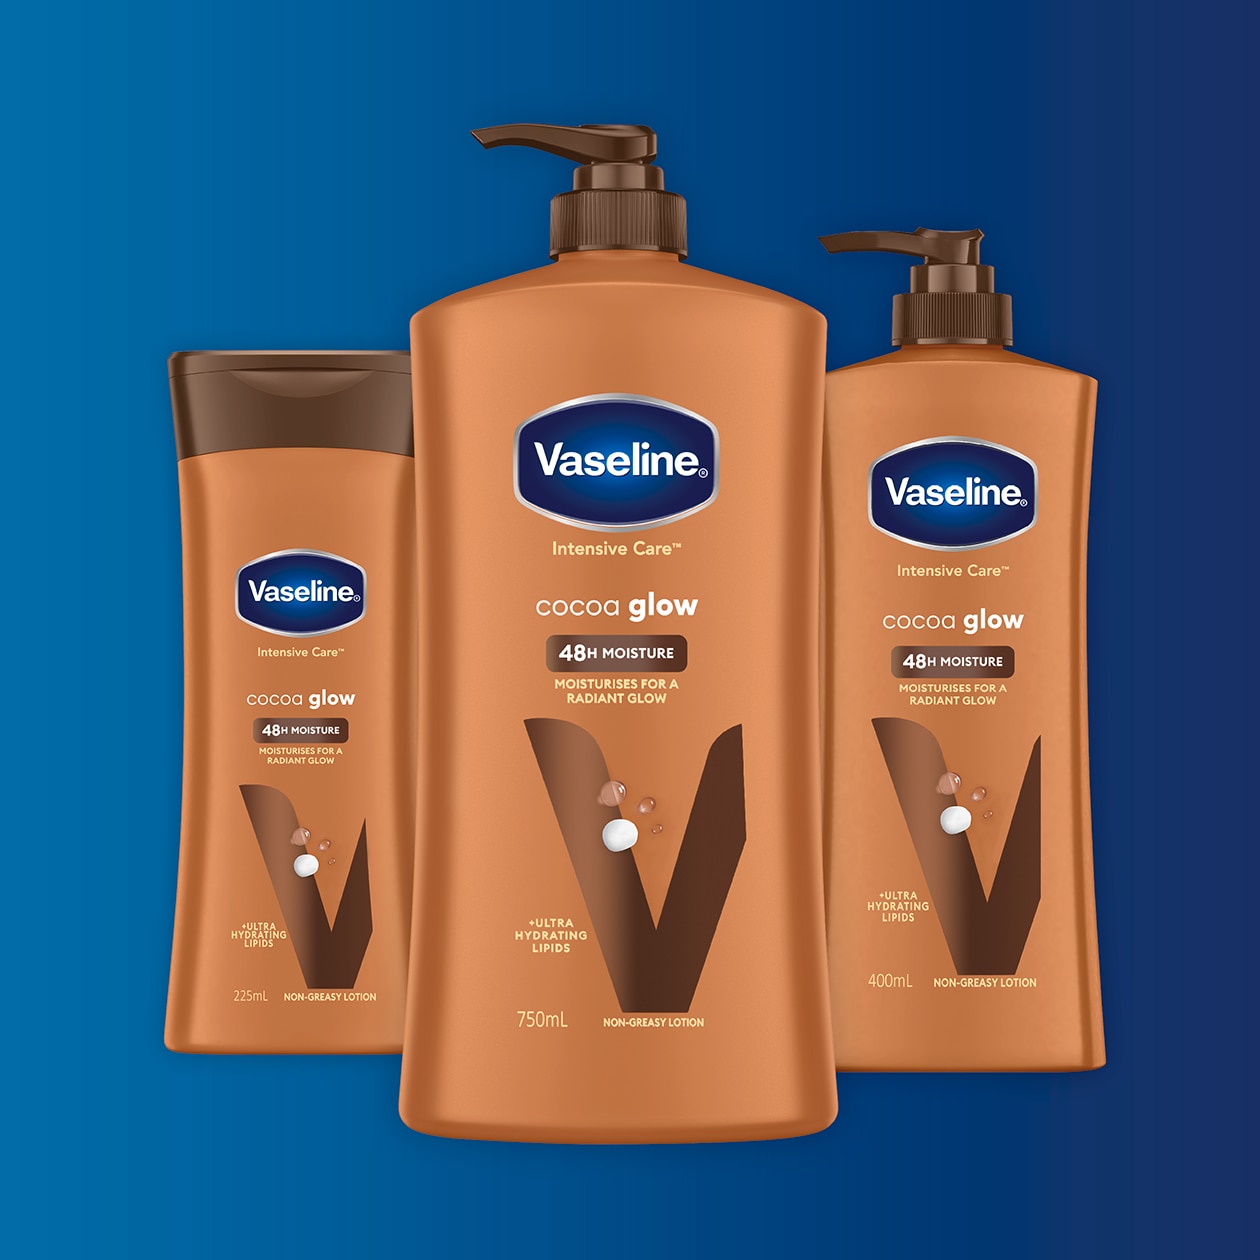 Vaseline products lineup